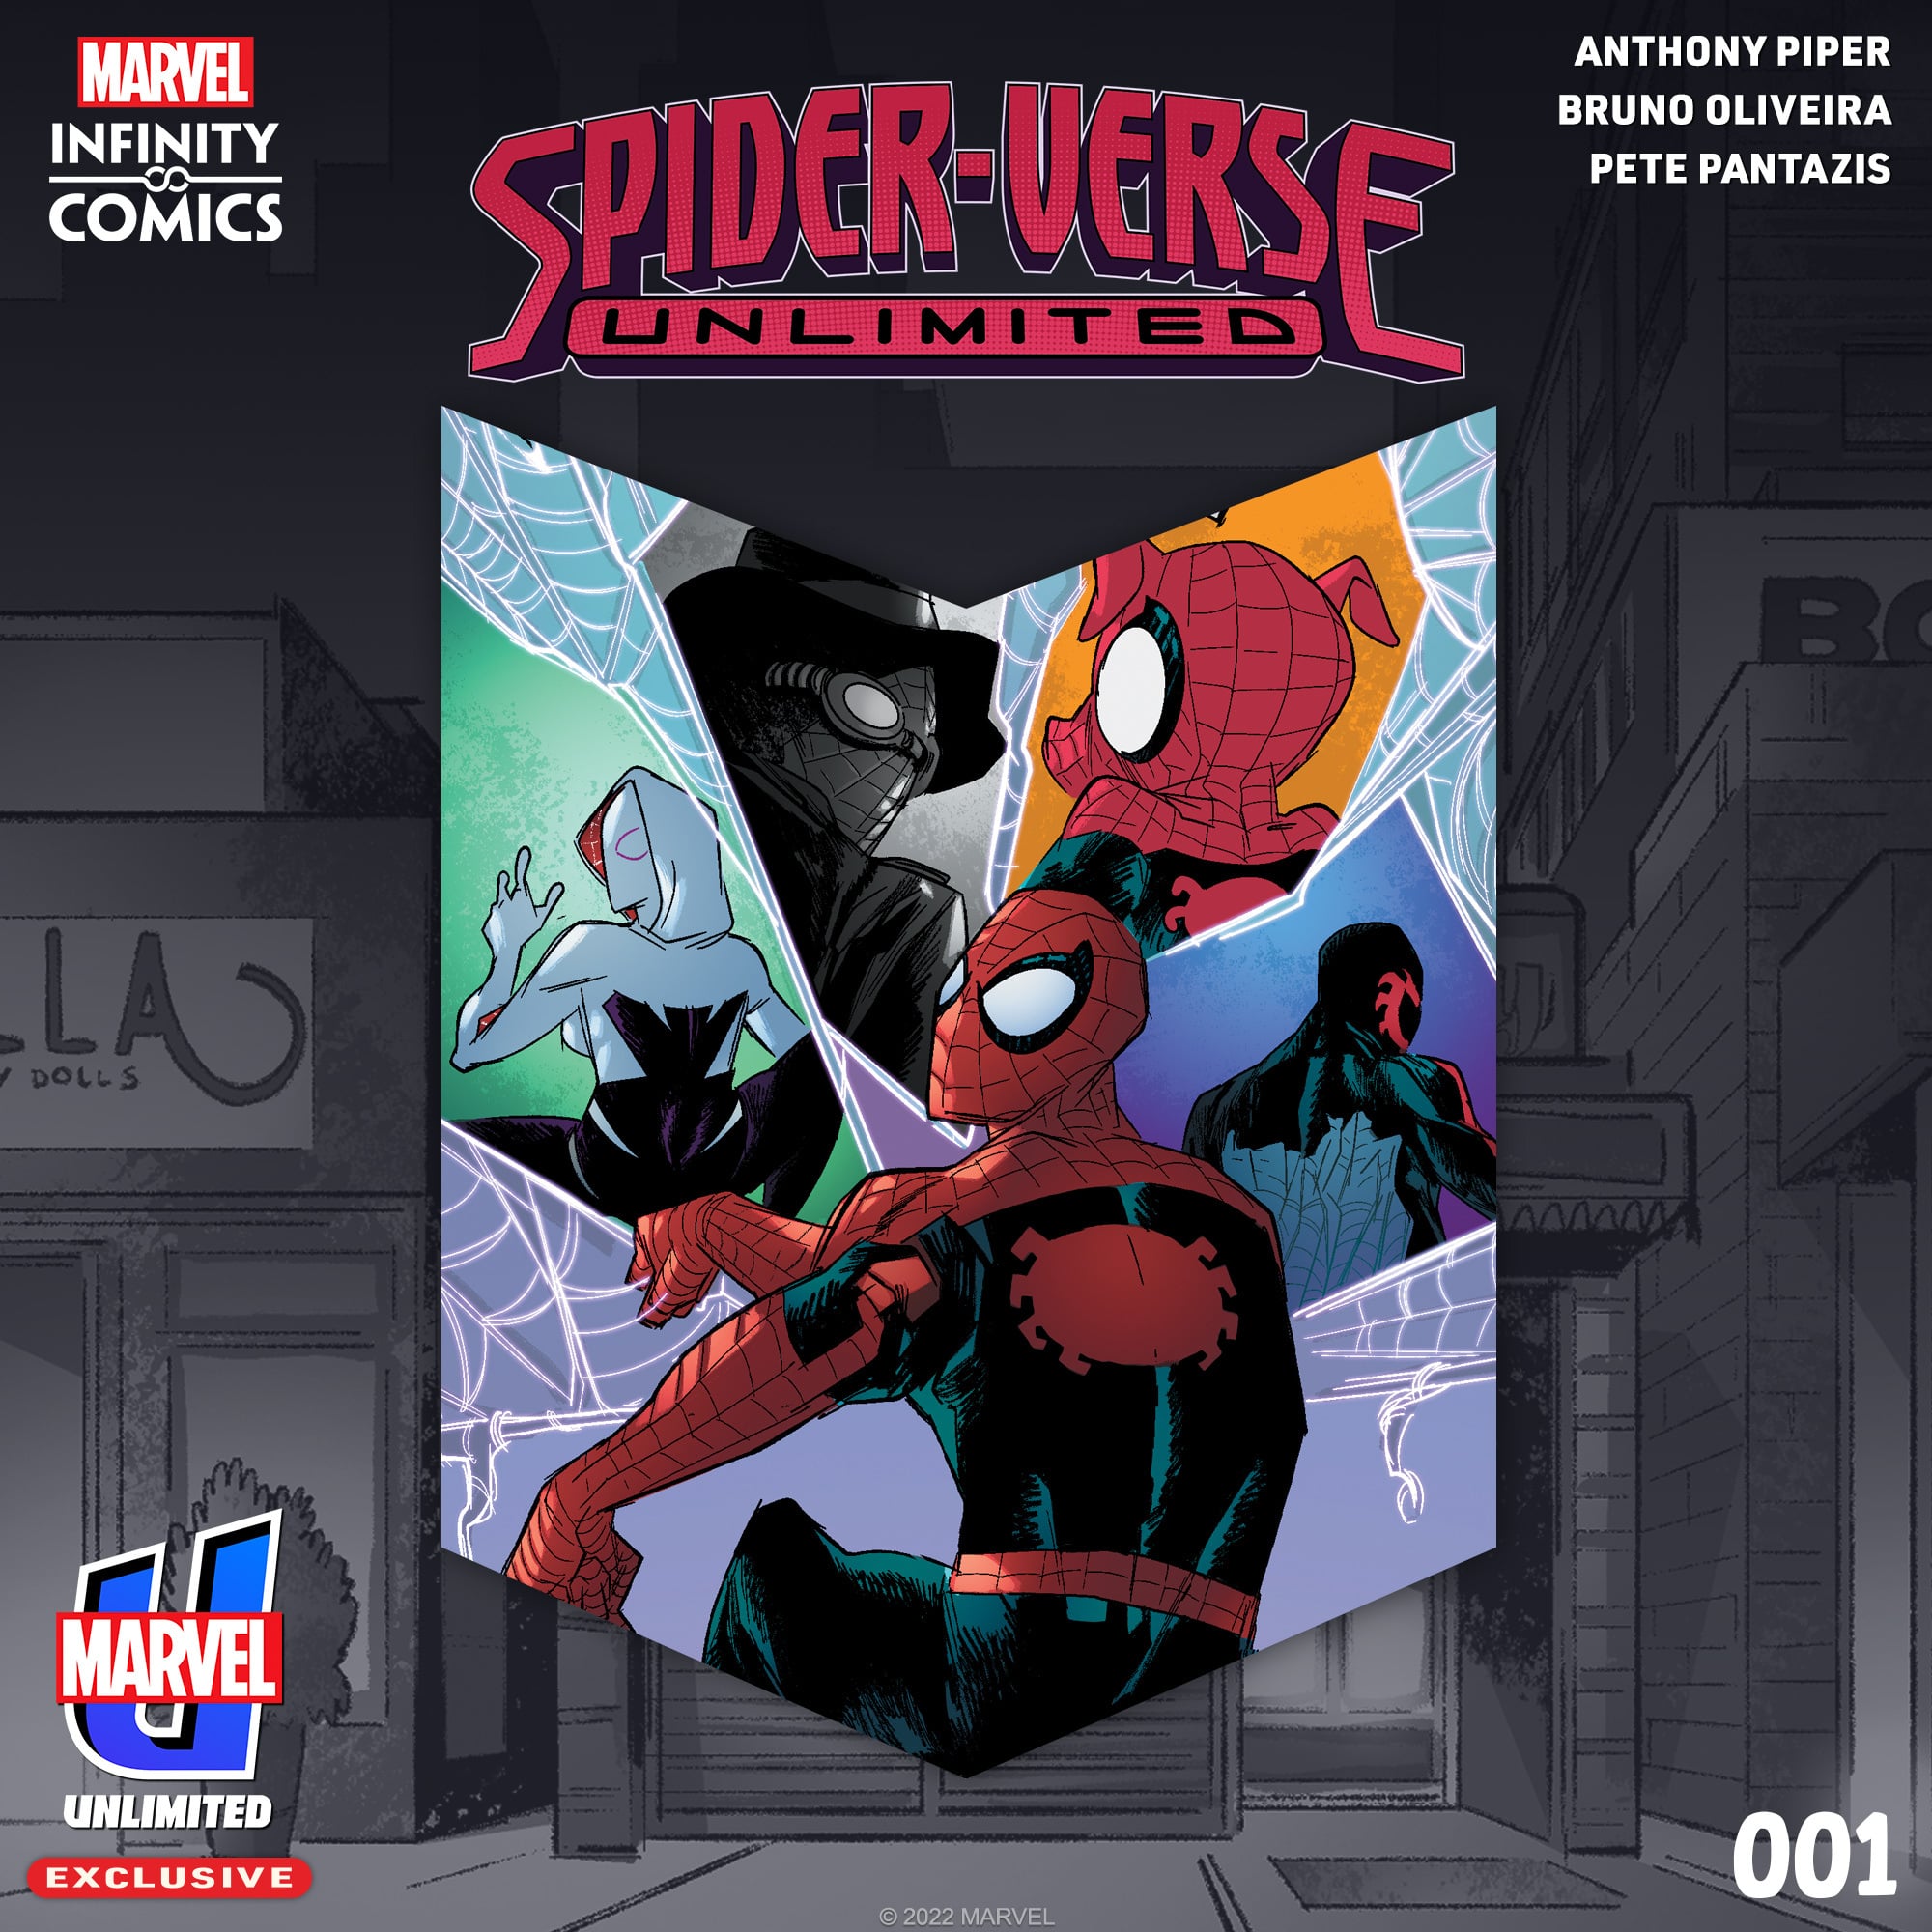 'Spider-Verse Unlimited' Marvel Unlimited launches today